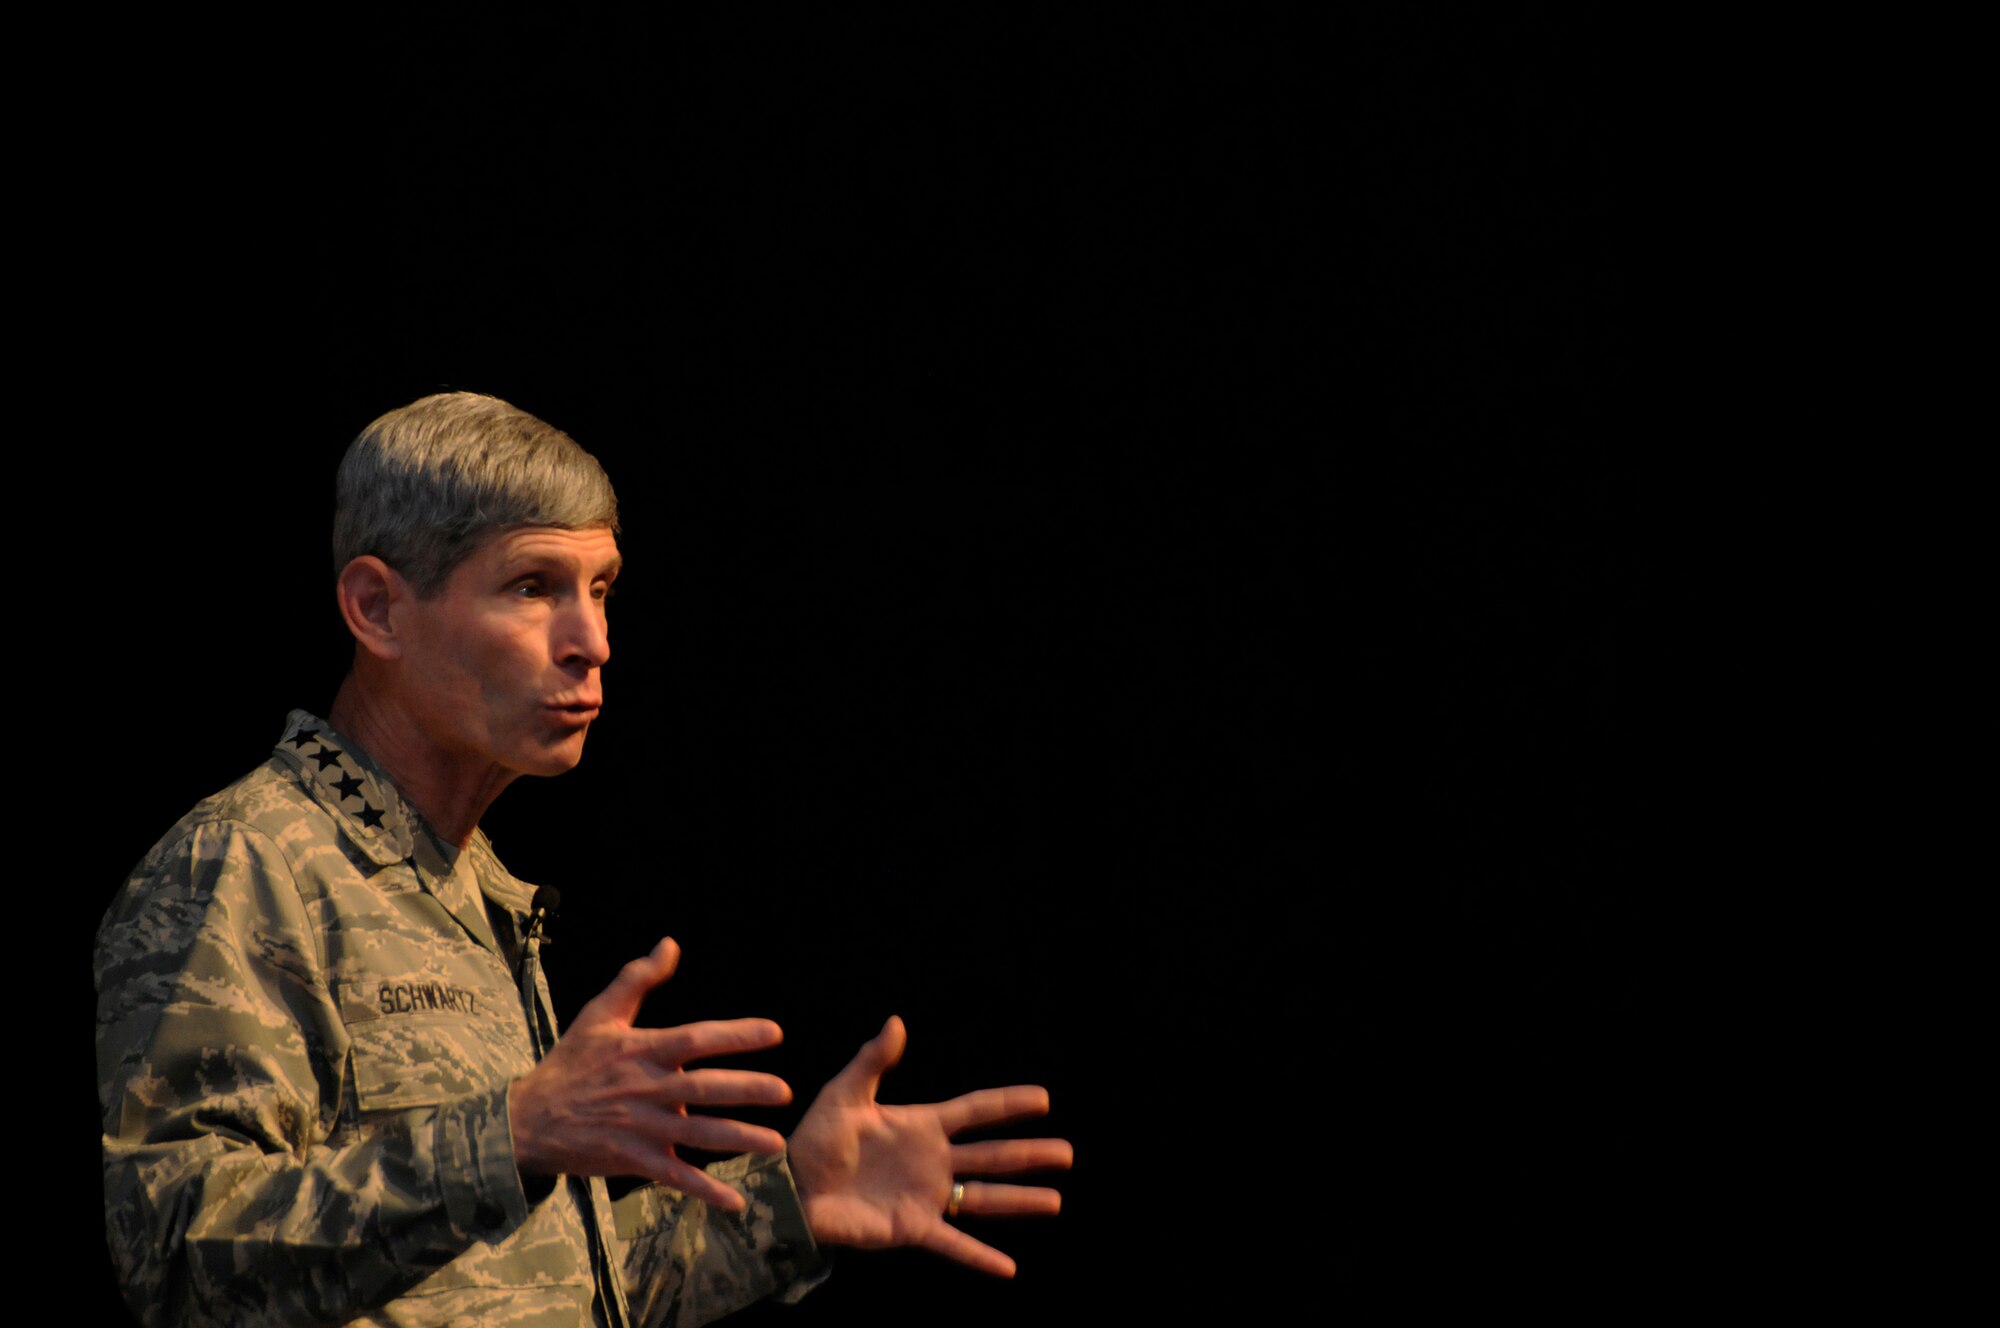 Air Force Chief of Staff Gen. Norton Schwartz speaks to an assembly of Airmen gathered from the 379th Air Expeditionary Wing Oct. 20.  Over 500 Airmen attended the assembly.  The visit marked the CSAF's first trip to the U.S. Air Forces Central area of responsibility since his appointment as the Air Force chief of staff. (U.S. Air Force photo by Tech. Sgt. Michael Boquette/Released)